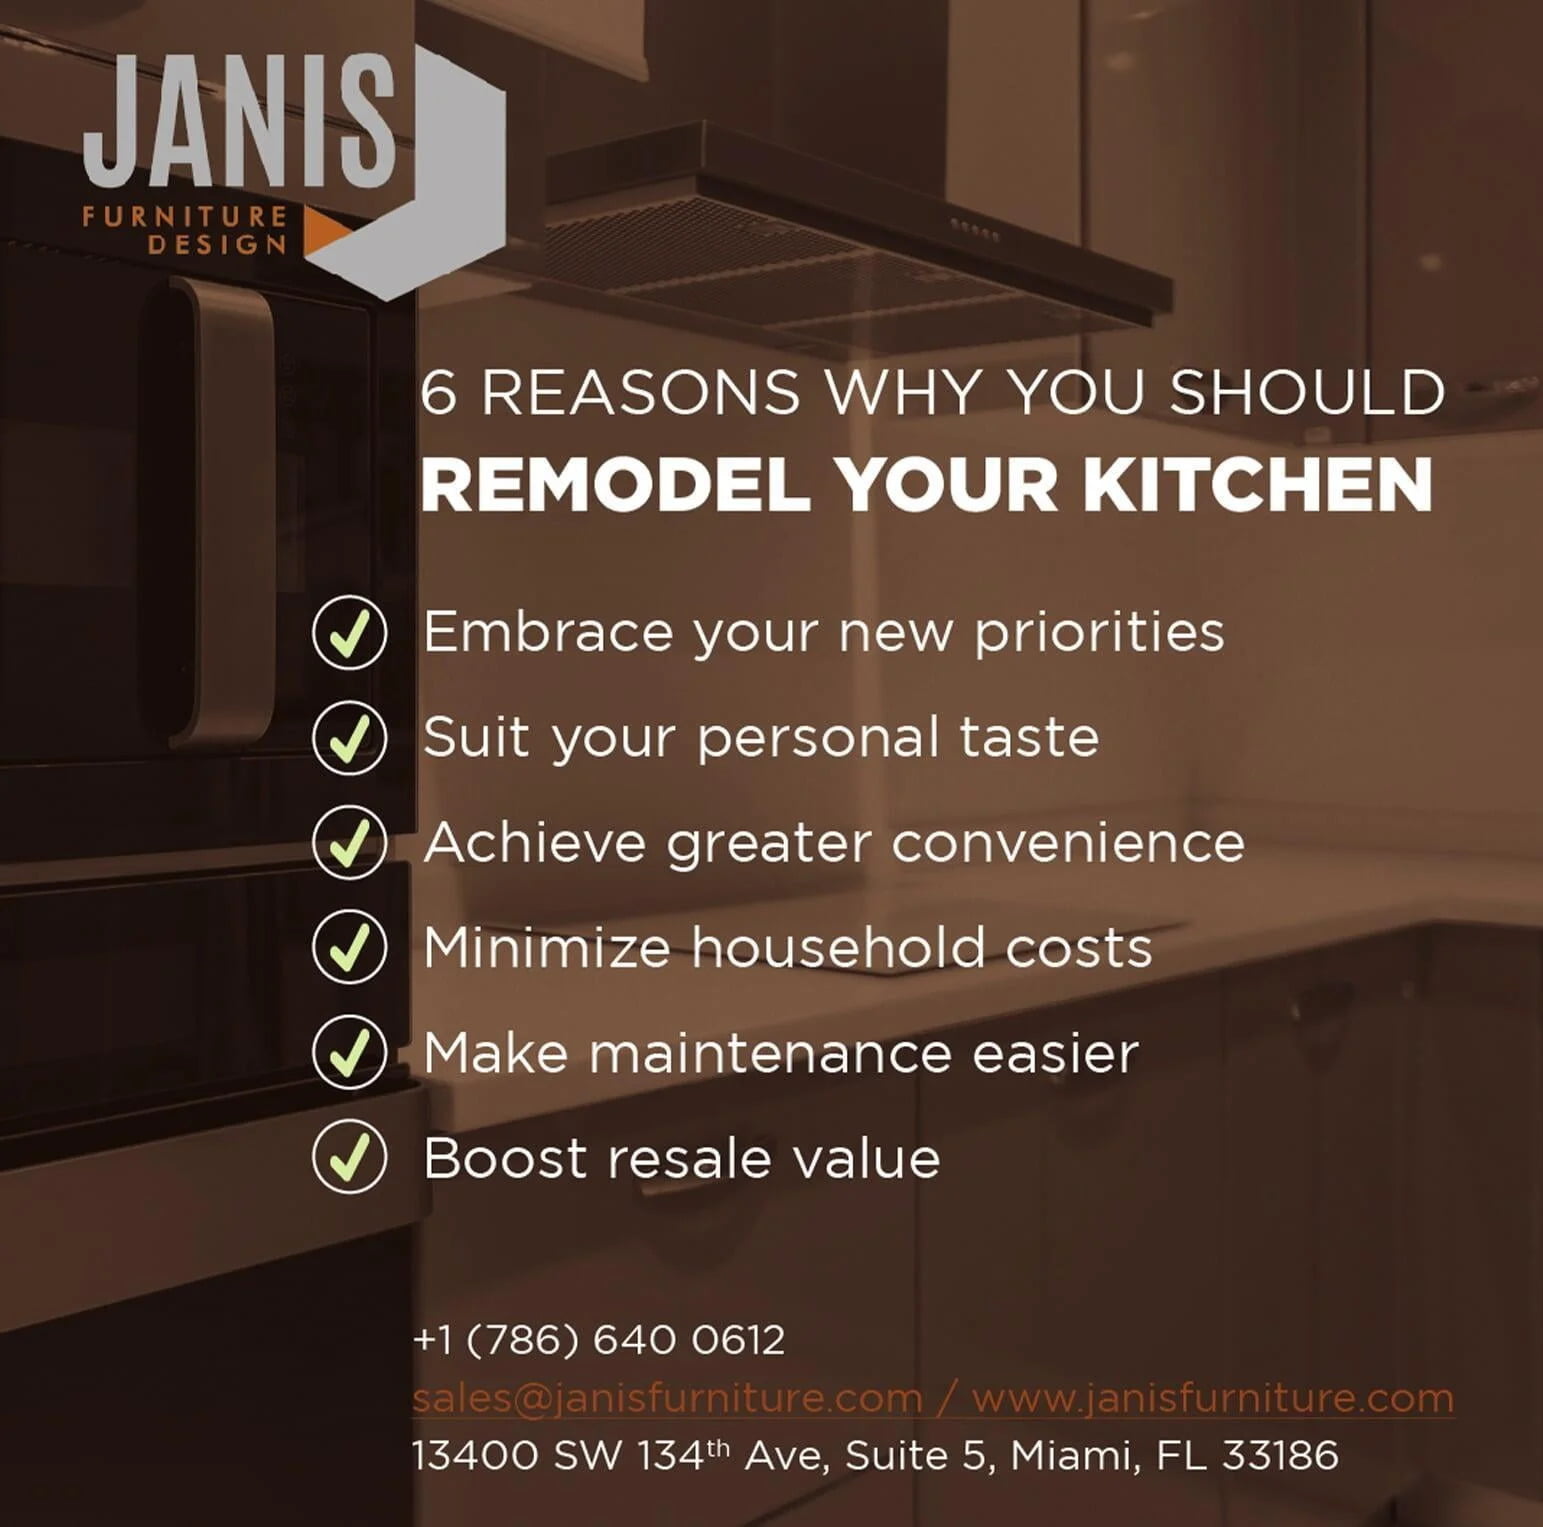 Janis Furniture. 6 reason why you should remodel your kitchen